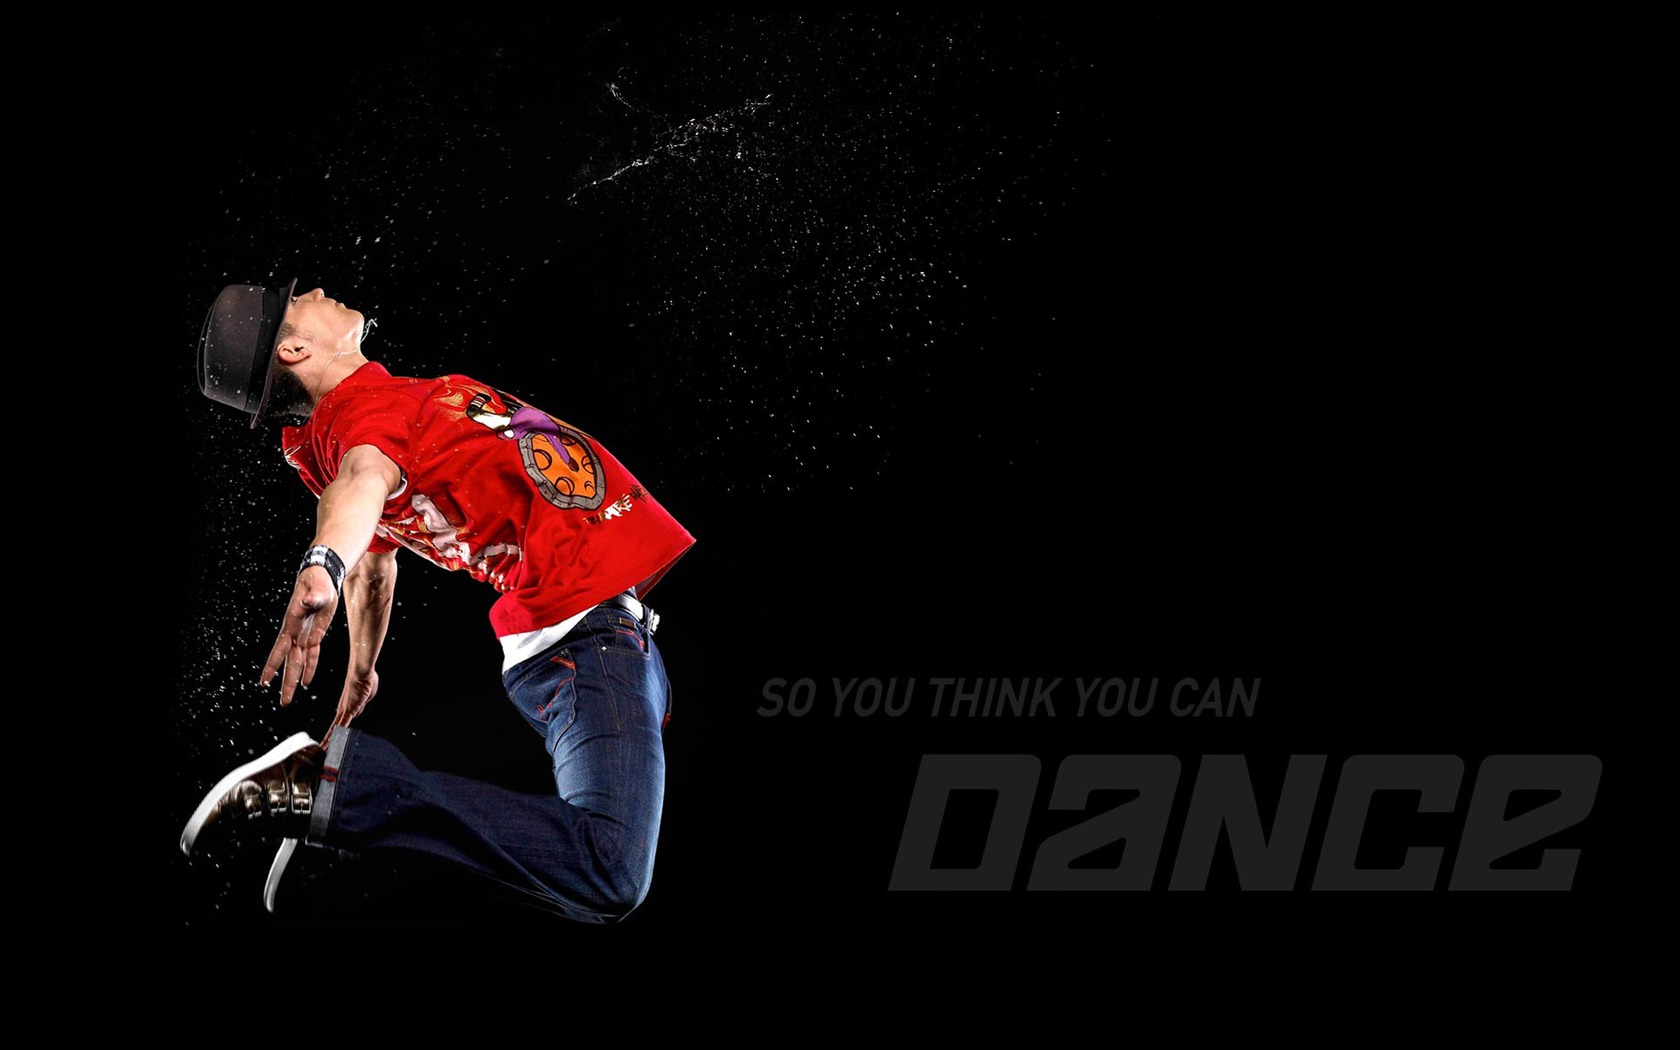 So You Think You Can Dance 舞林爭霸壁紙(一) #6 - 1680x1050